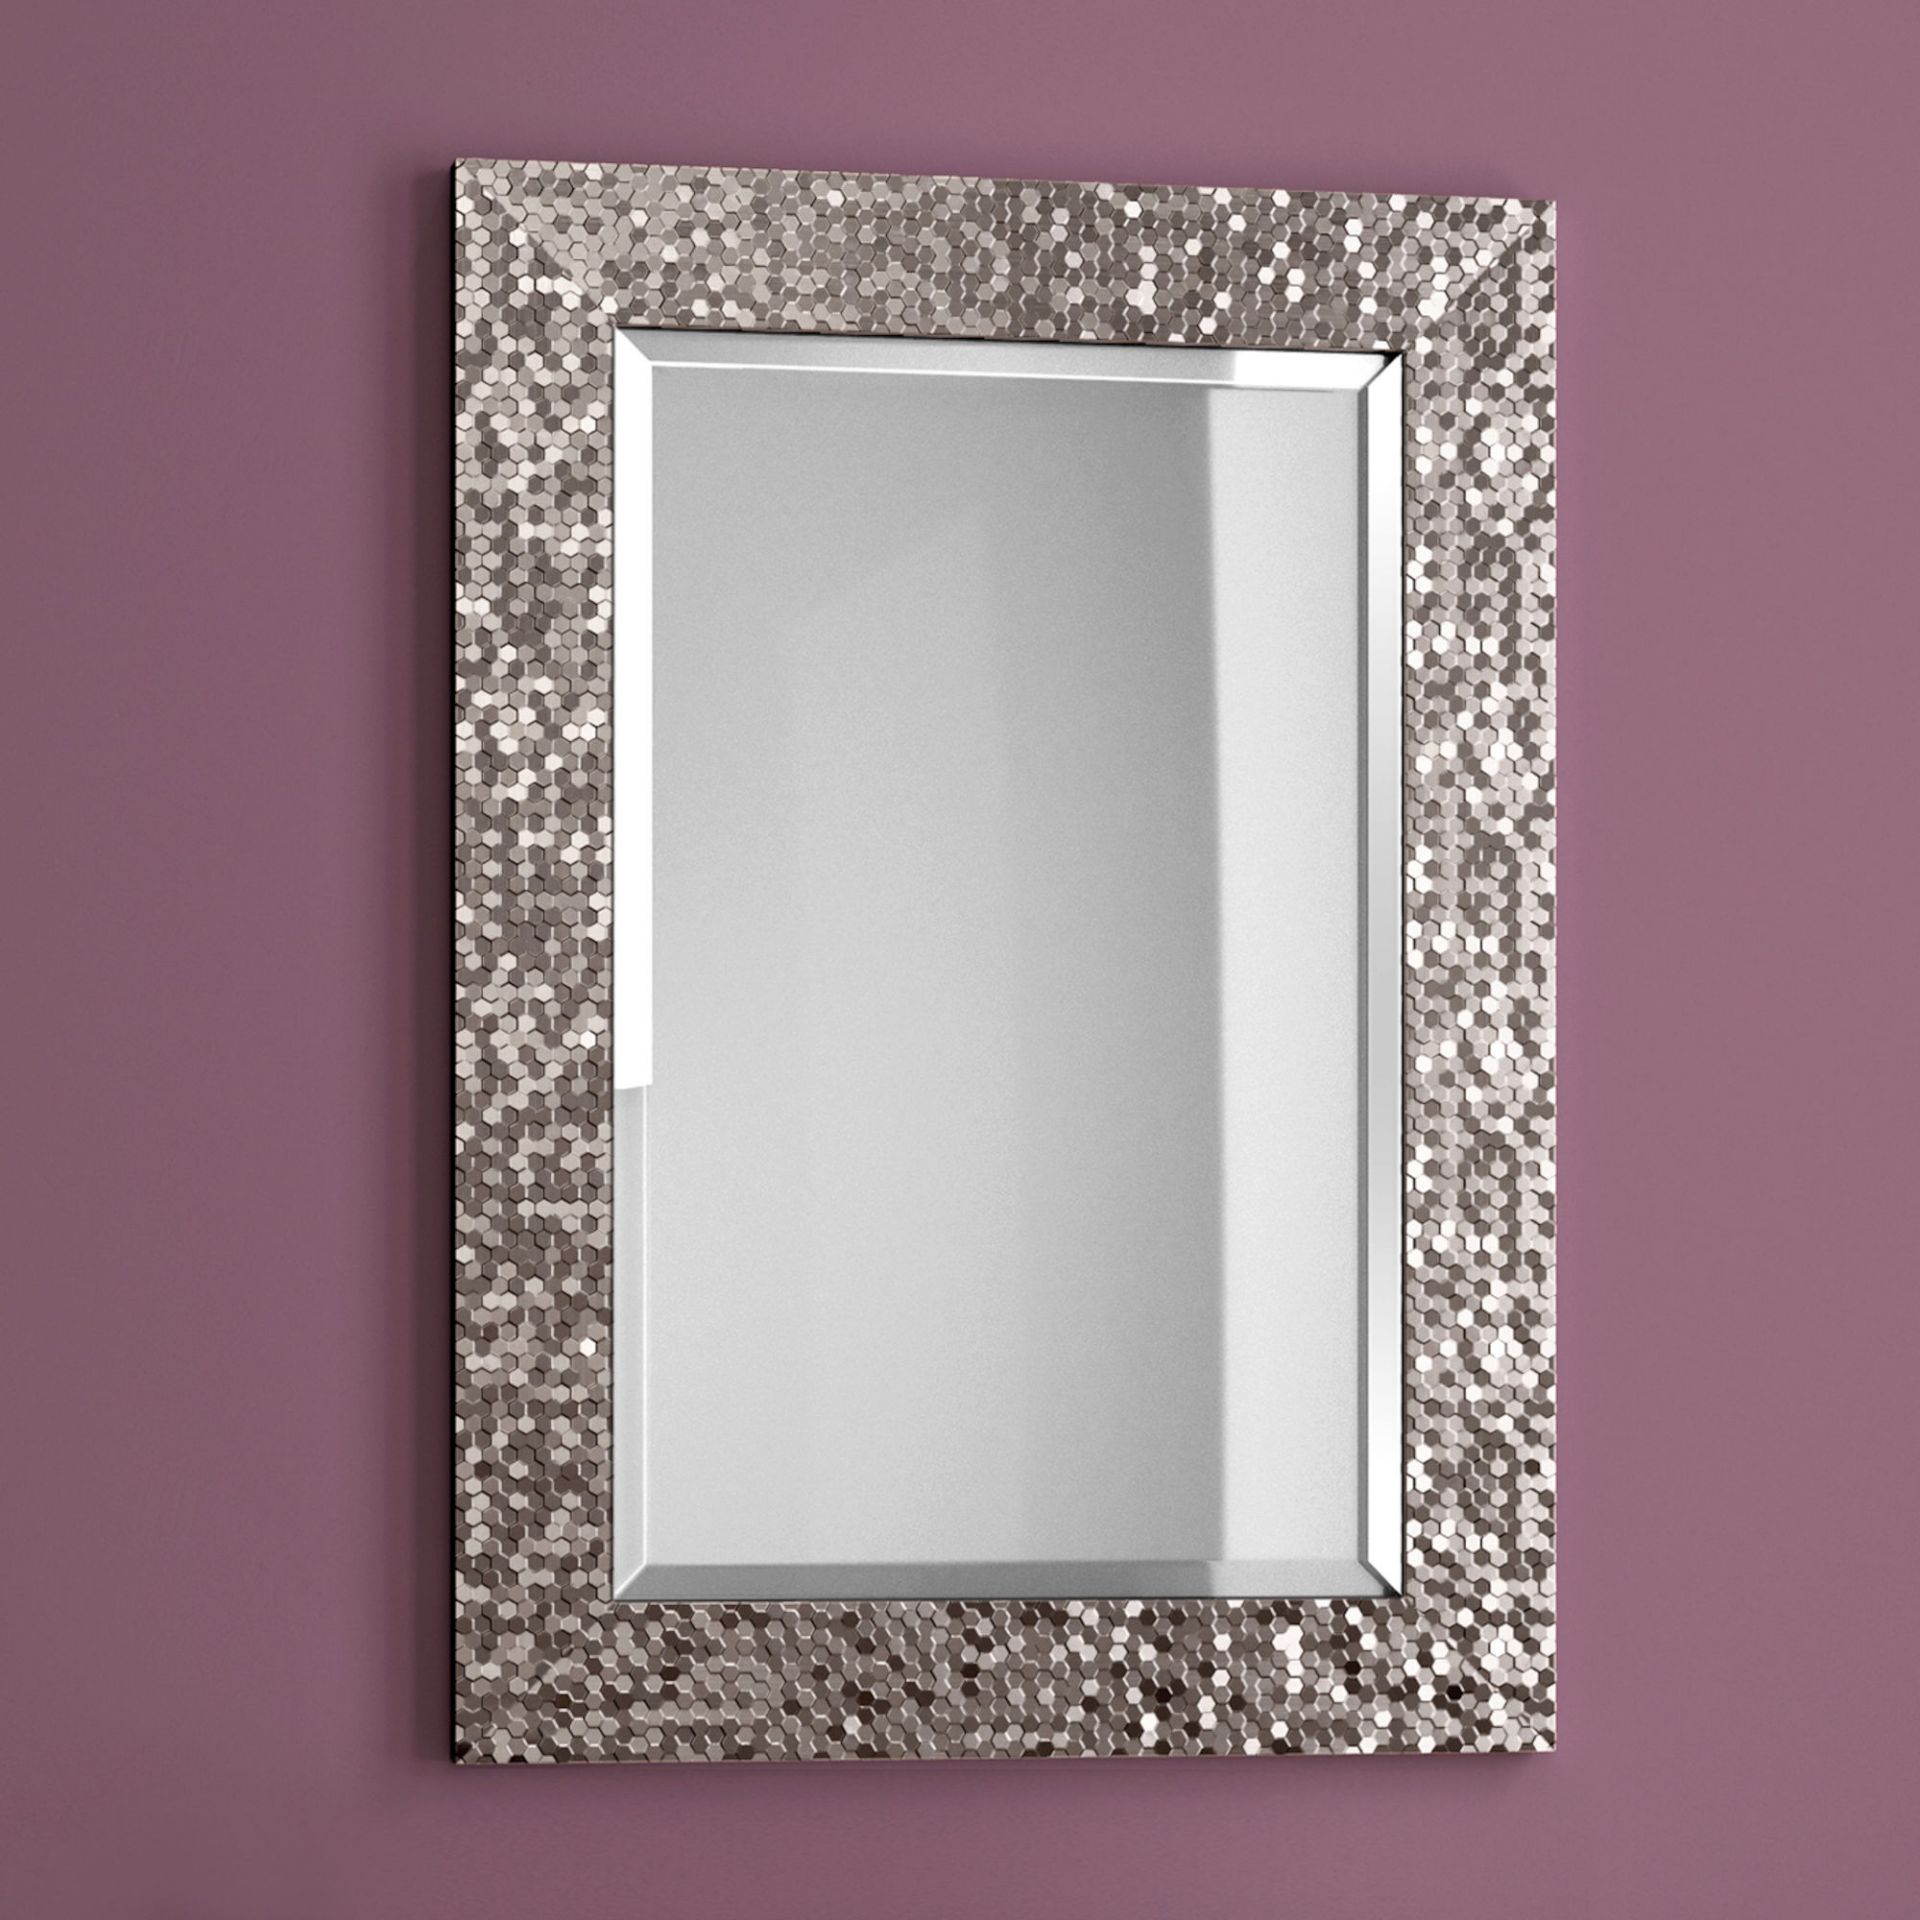 (MW28) 500x700mm Holly Pewter Bevelled Framed Mirror. RRP £79.99. Made from eco friendly recycled